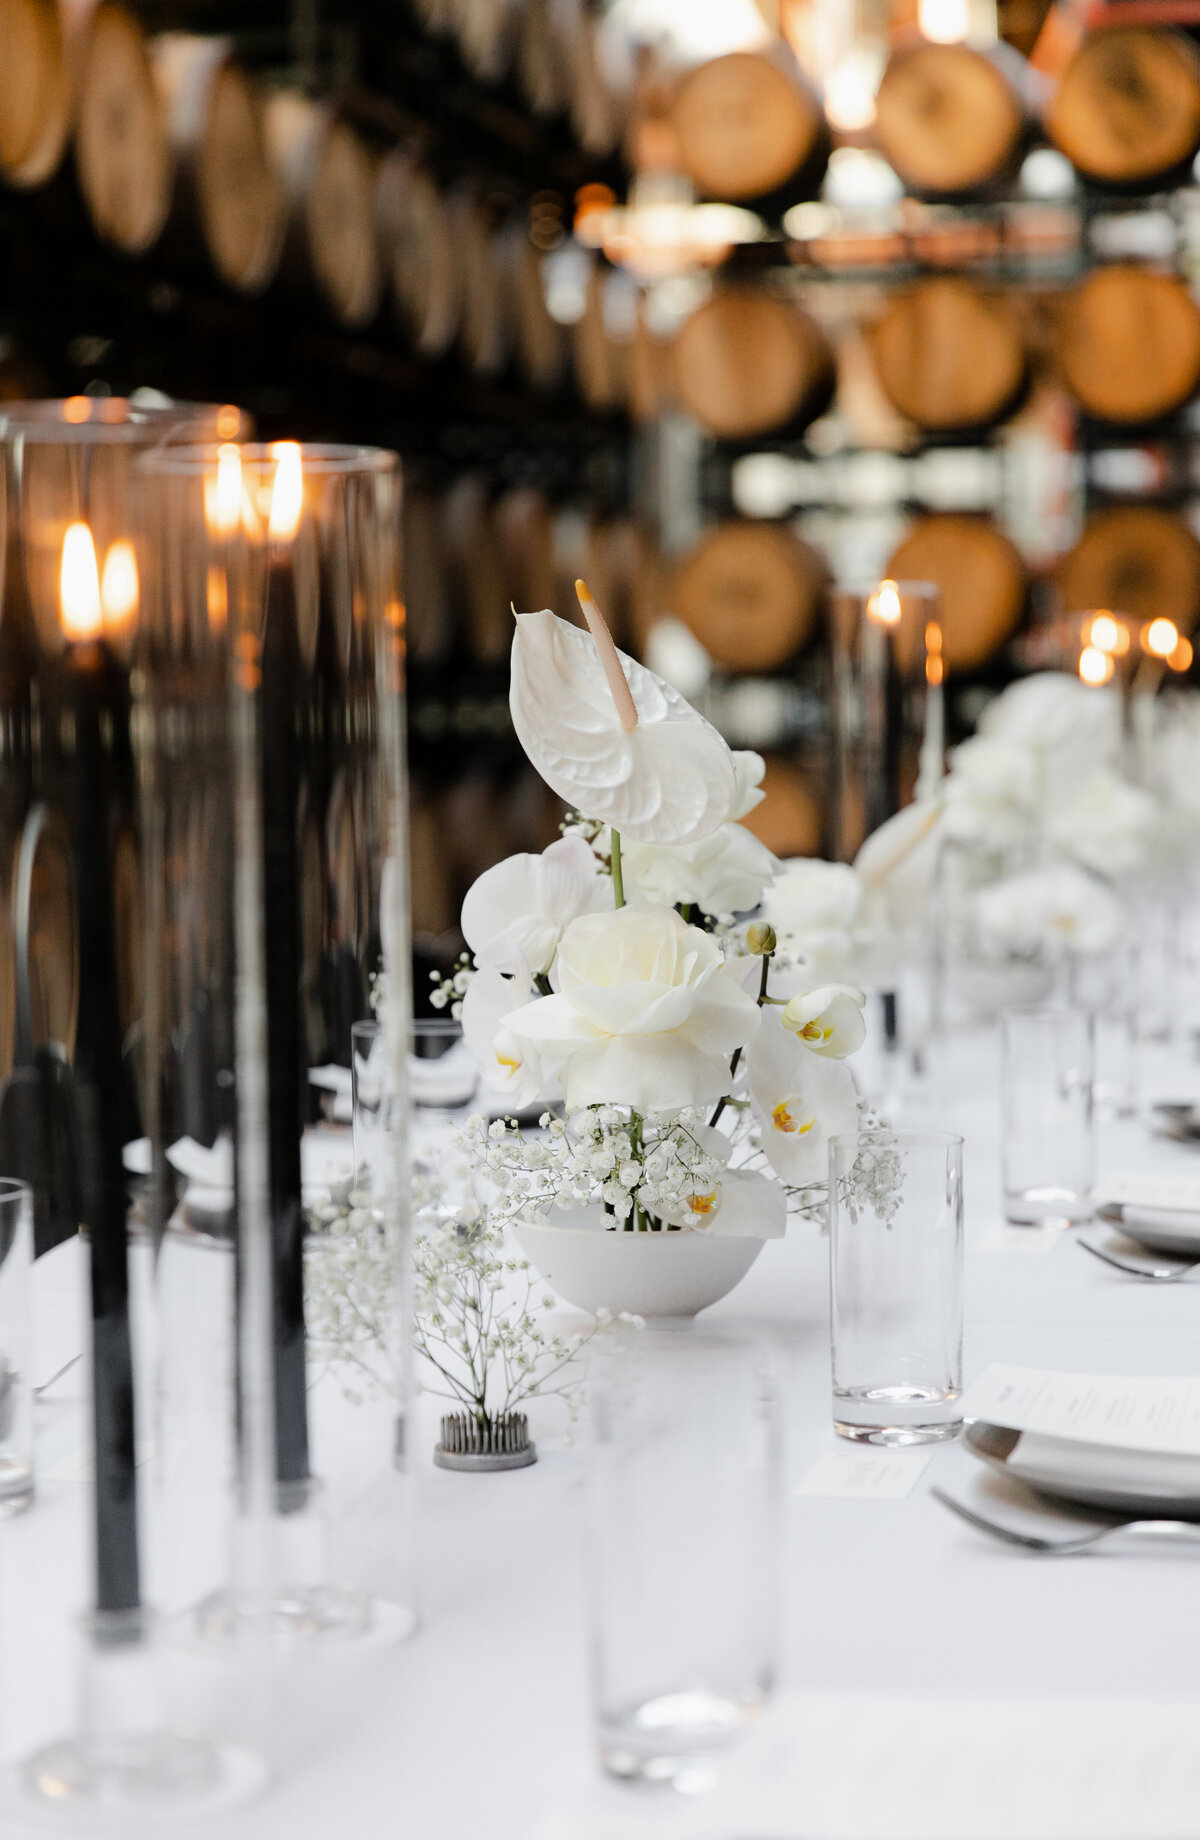 White lilies and baby's breath paired with black candlesticks decorate wedding reception tables at Moody Tongue Brewery.